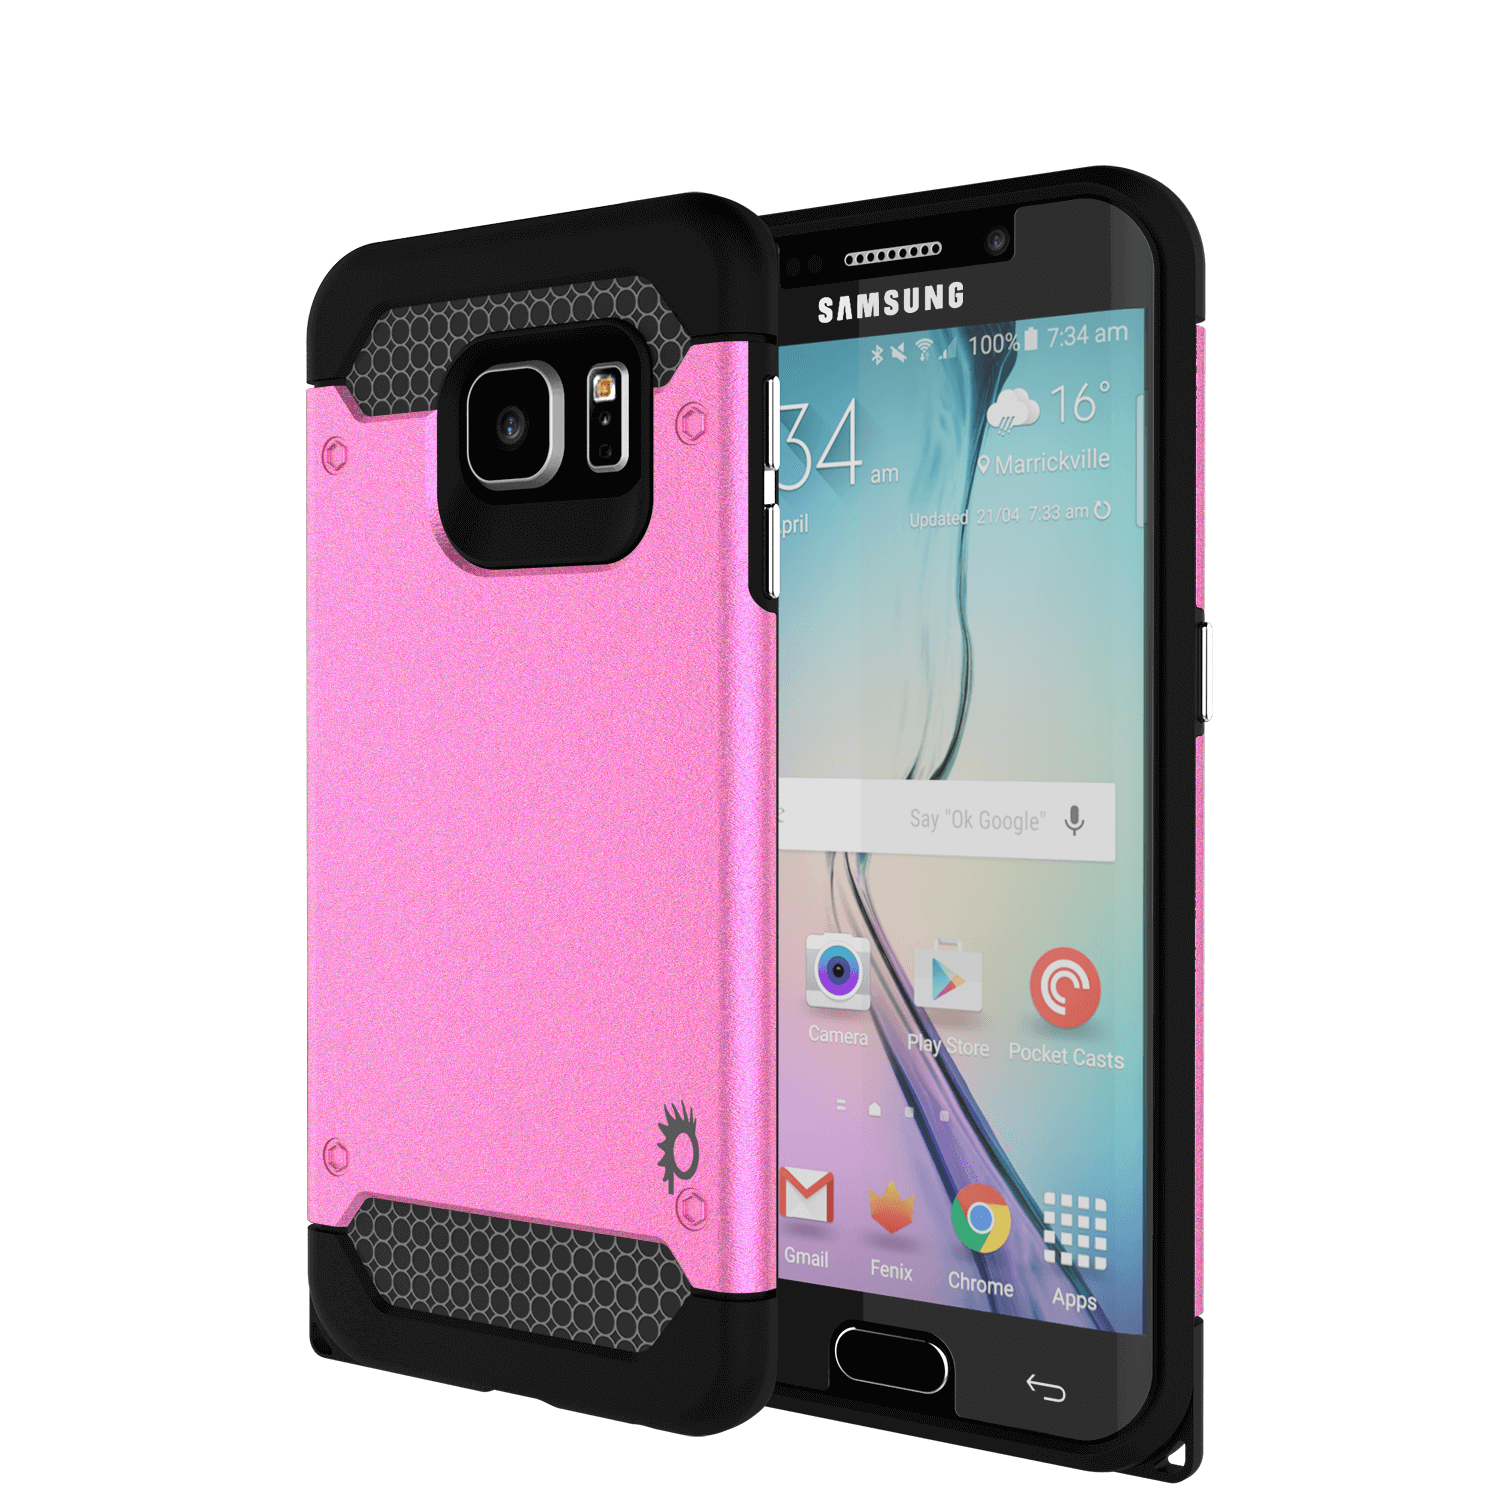 Galaxy s6 EDGE Plus Case PunkCase Galactic Pink Series Slim Armor Soft Cover w/ Screen Protector